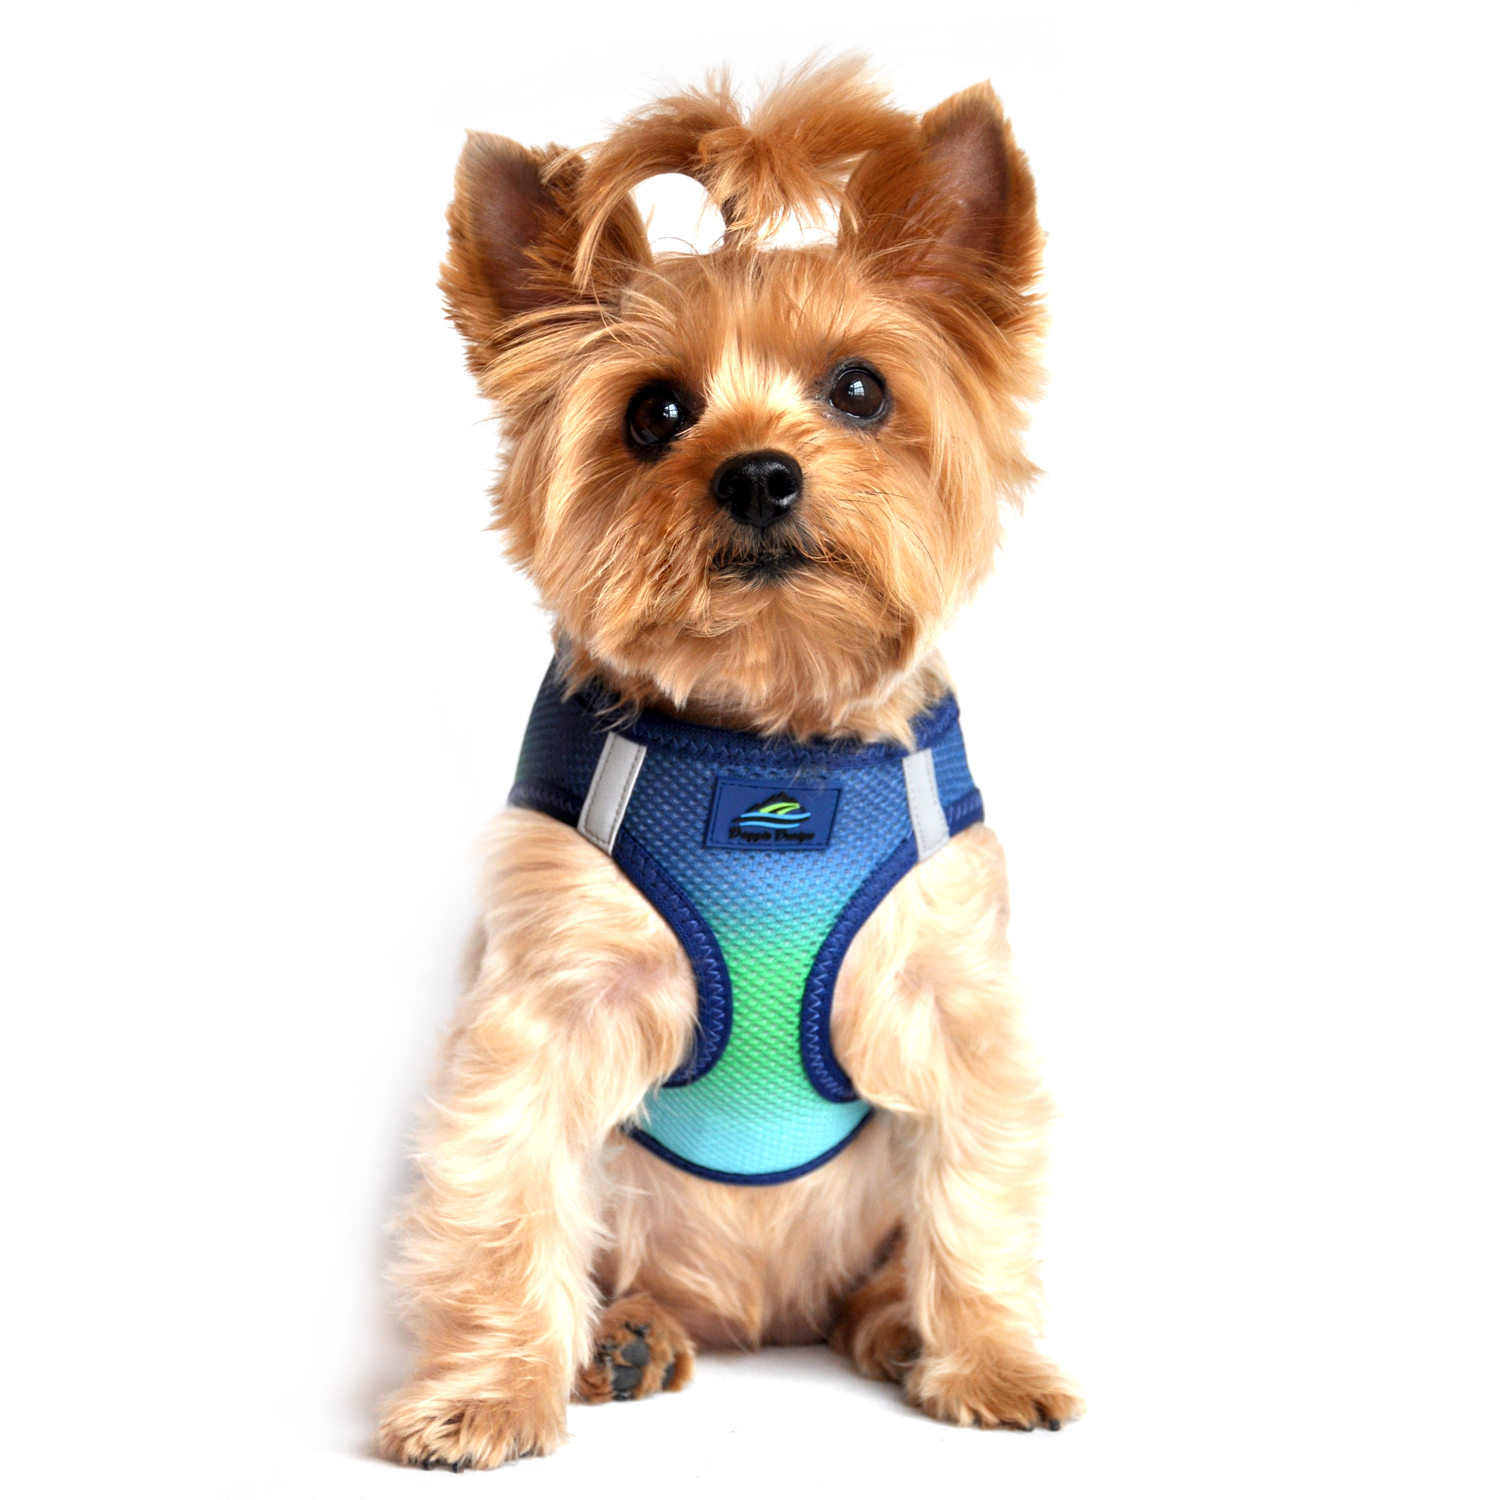 American River Choke-Free Dog Harness by Doggie Design - Northern Lights Ombre